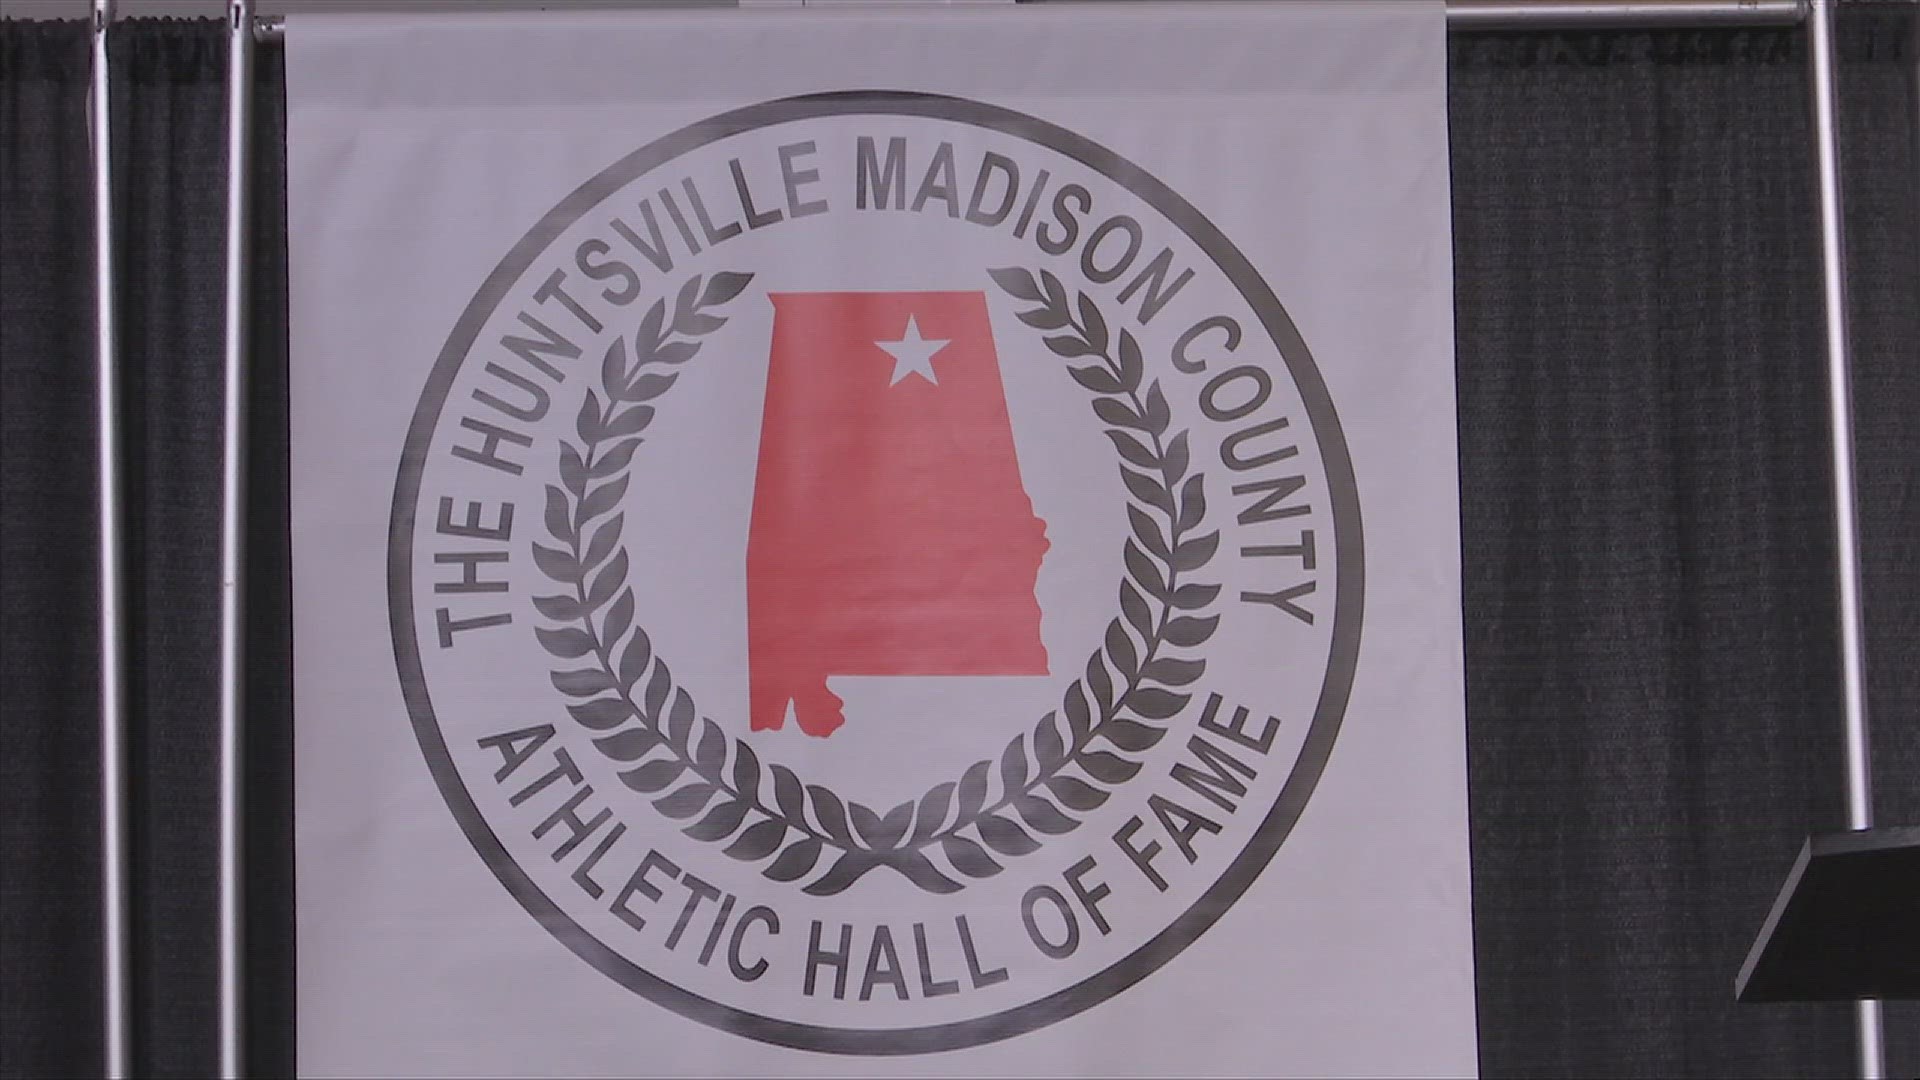 The annual Hall of Fame and banquet ceremony took place at the North Hall at the Von Braun Center.